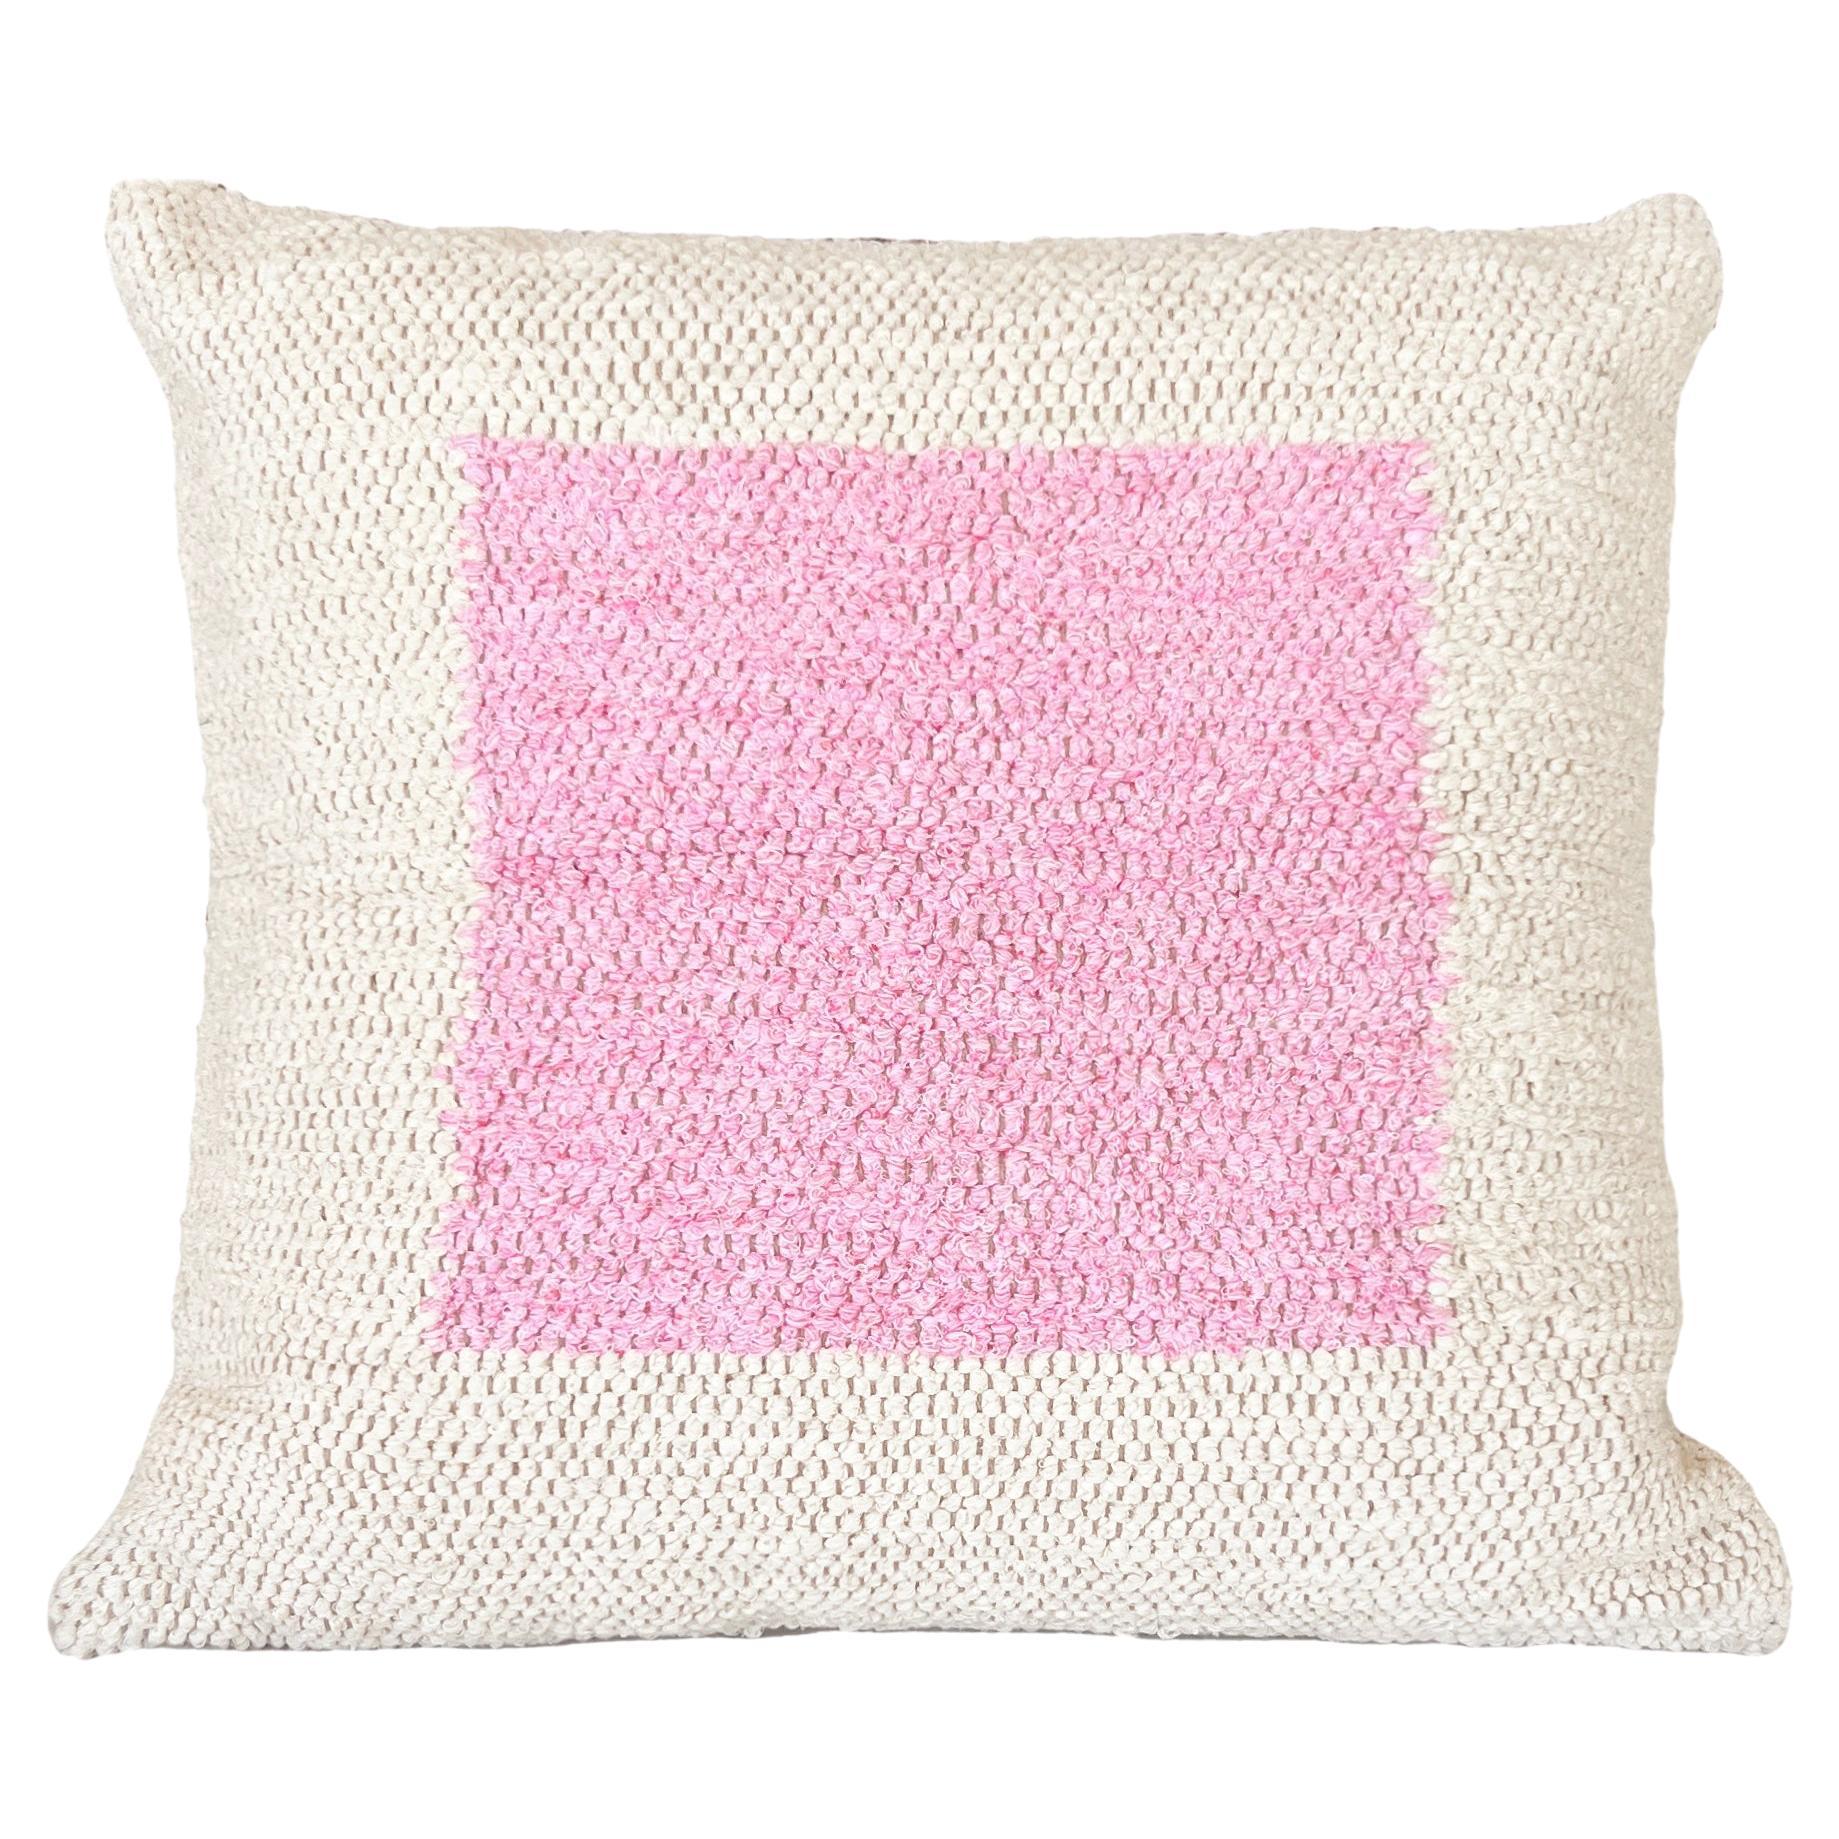 Casa Cubista Handwoven Cotton Pink Square Throw Pillow, in Stock